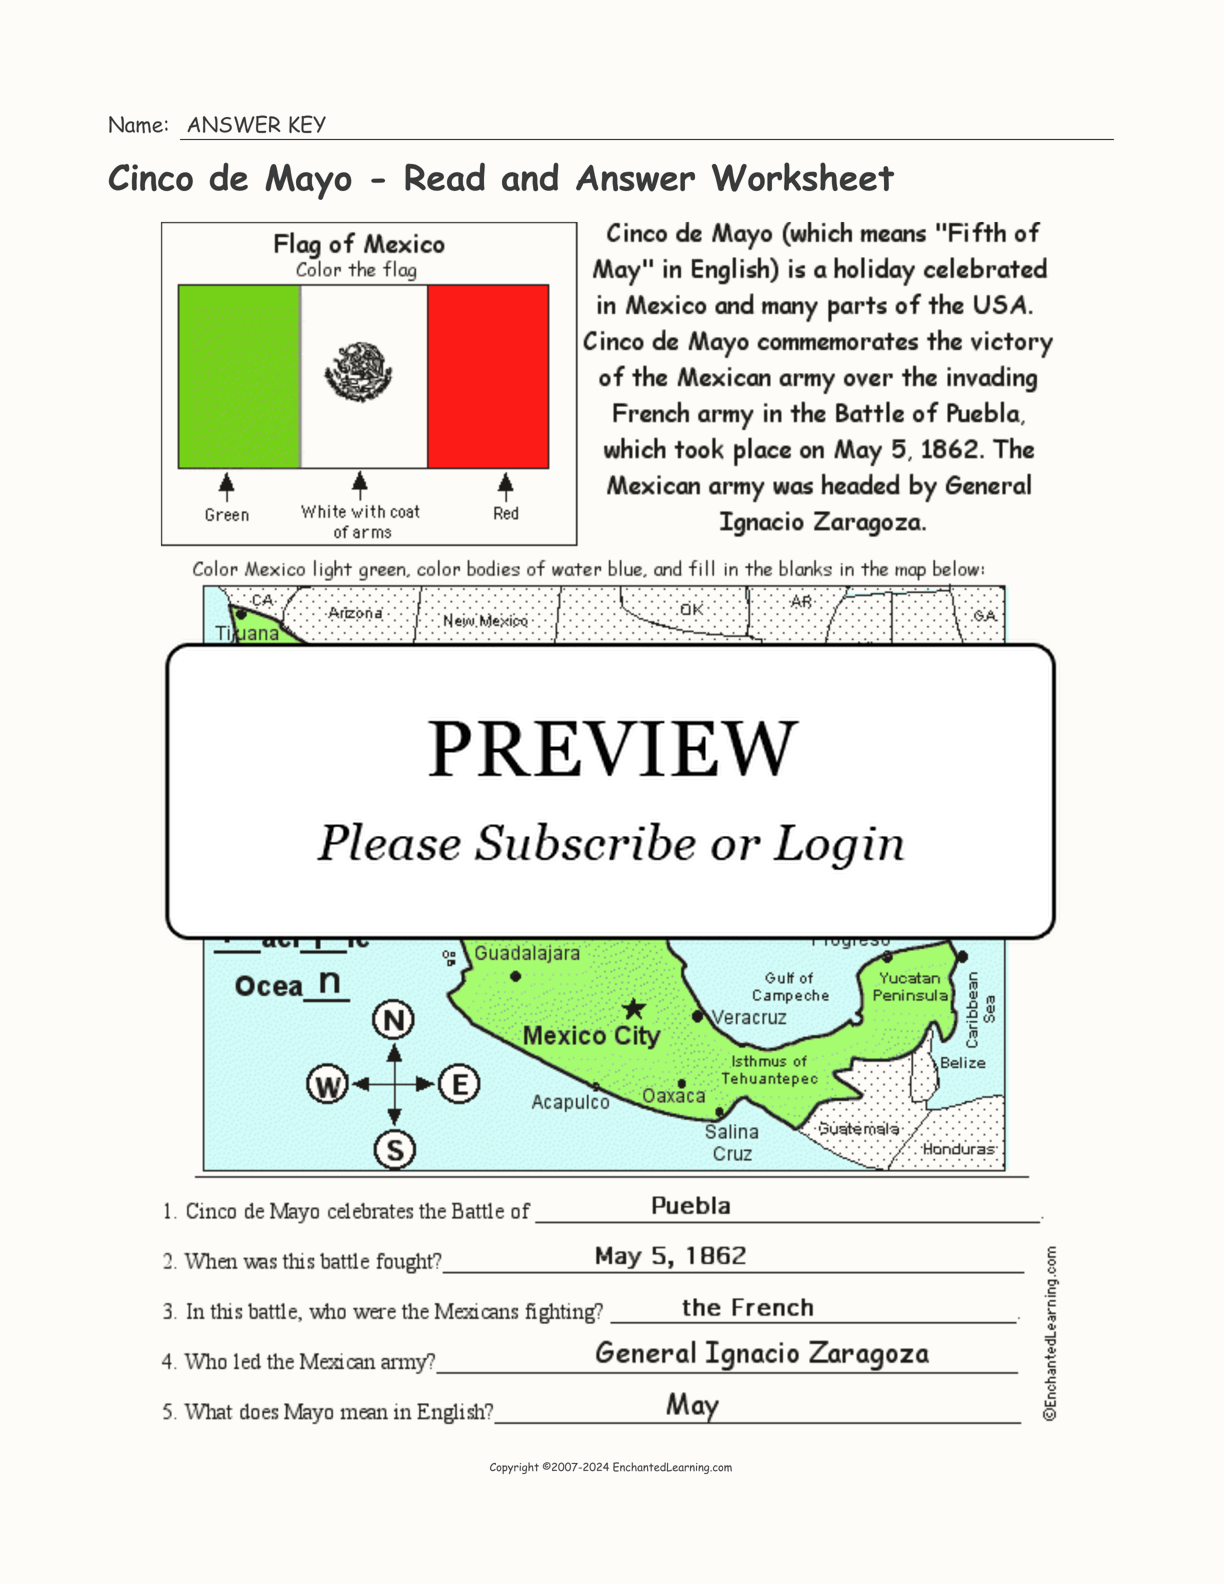 Cinco de Mayo - Read and Answer Worksheet interactive worksheet page 2